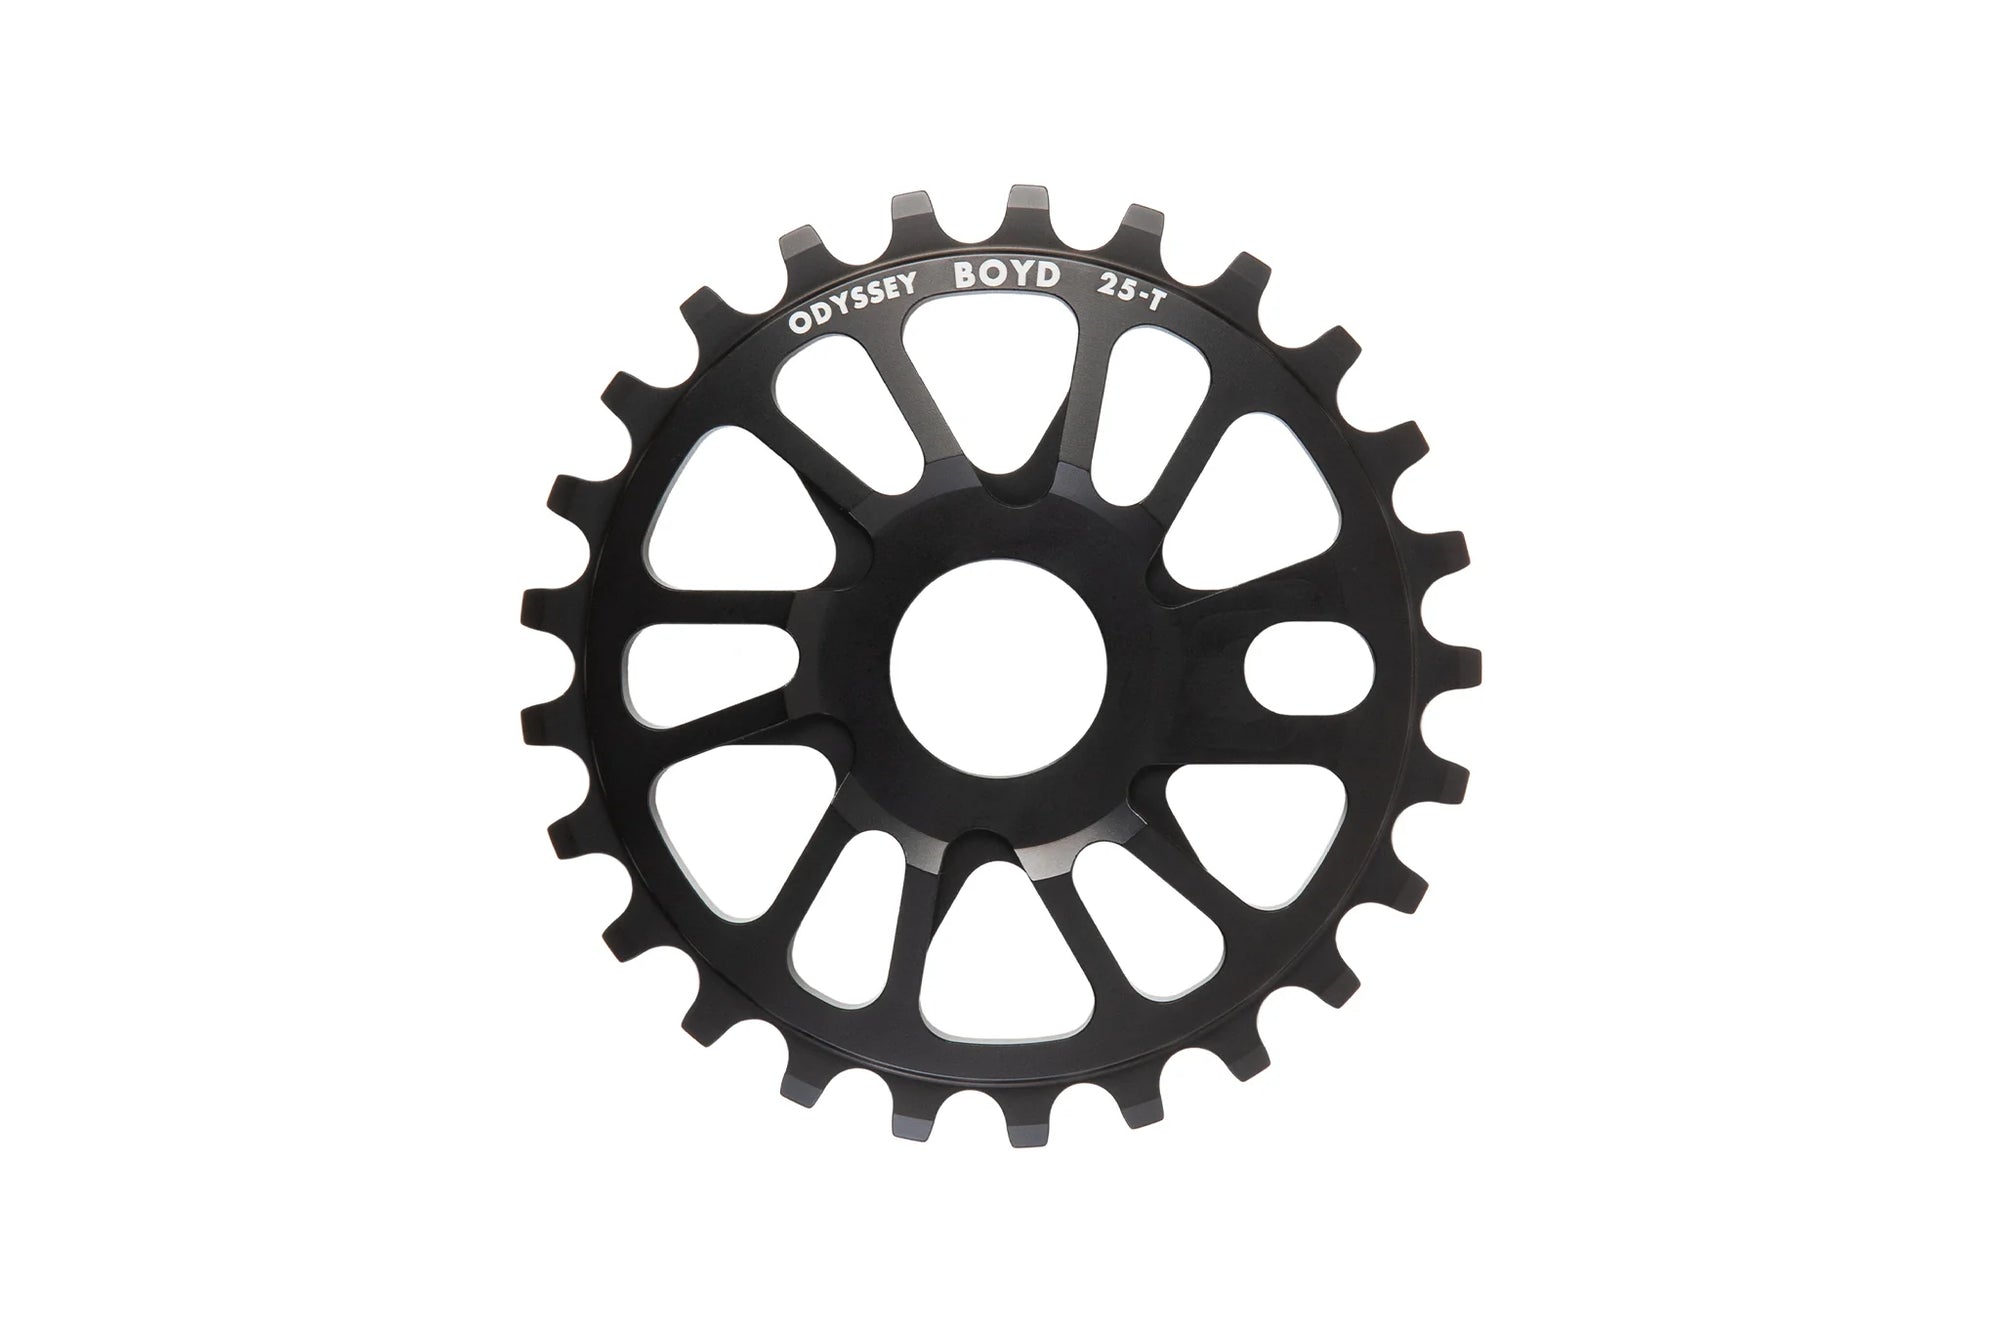 Odyssey Boyd Sprocket (Various Sizes) - Downtown Bicycle Works 